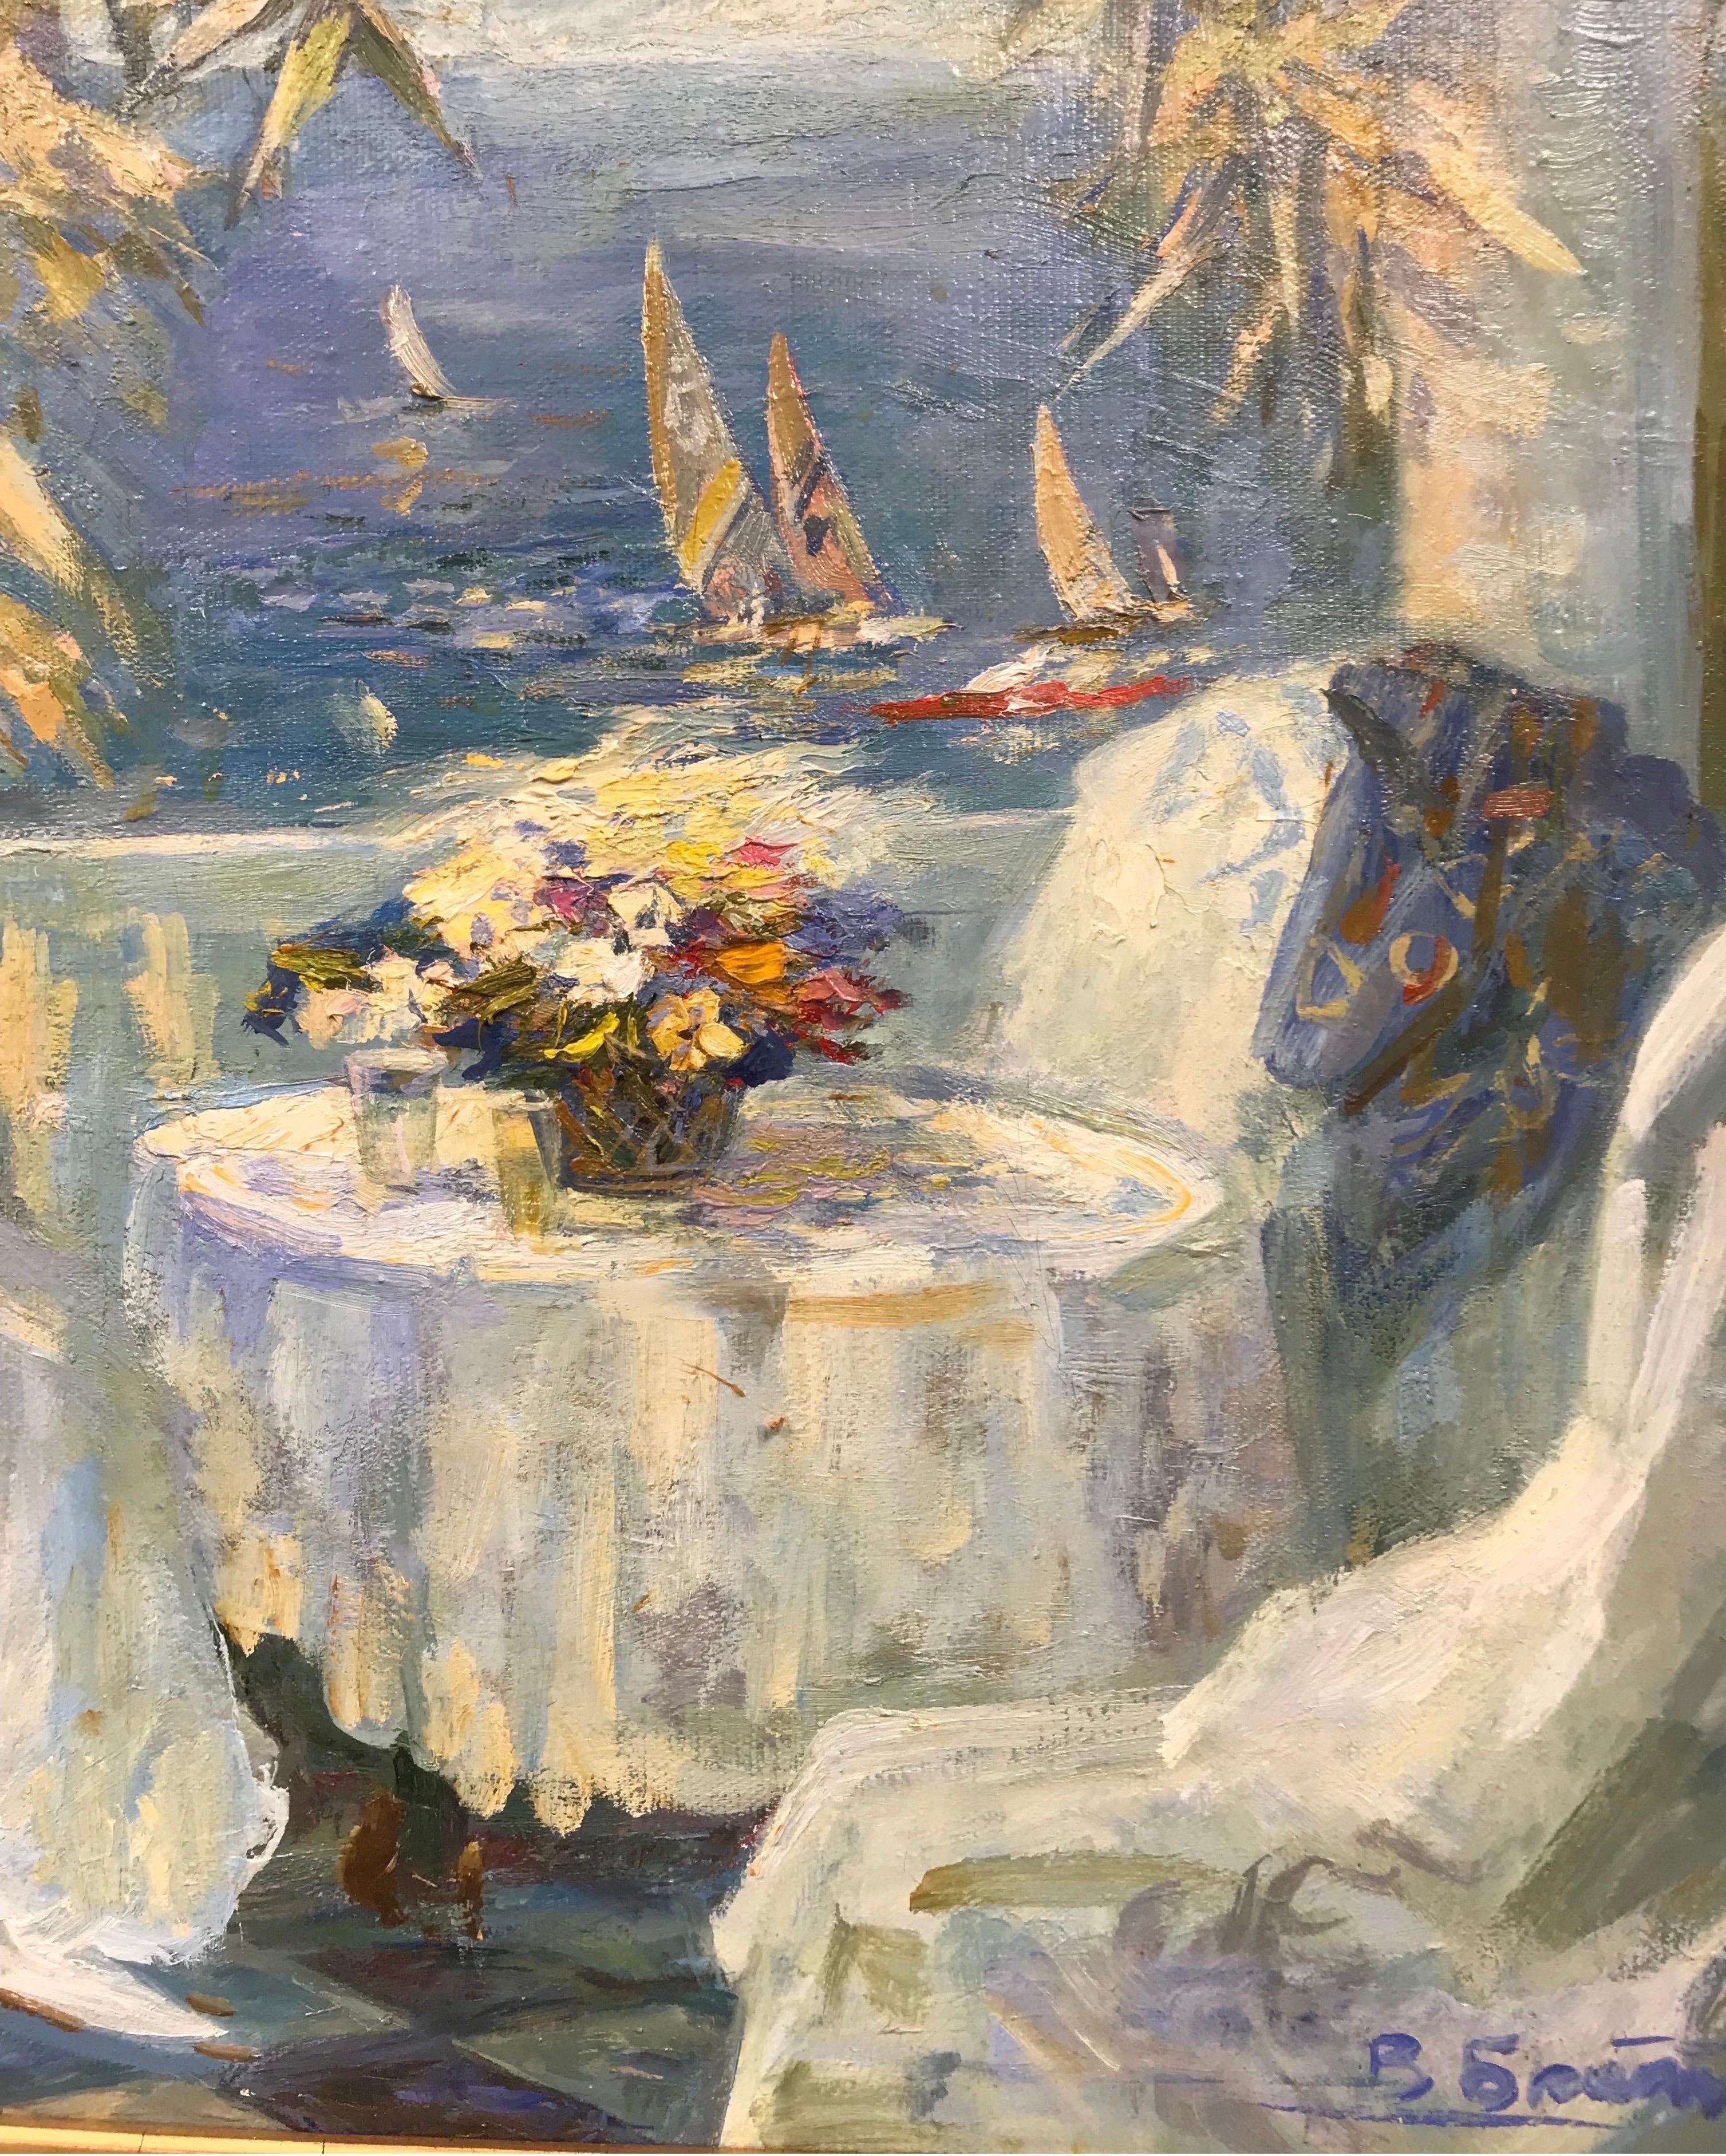 Artist/ School: European School, signed indistinctly, late 20th century

Title: Elegant young lady on terrace with flowers, overlooking a coastline seascape. 

Medium: oil on canvas, framed

Framed: 24 x 31 inches
Canvas: 18.5 x 26